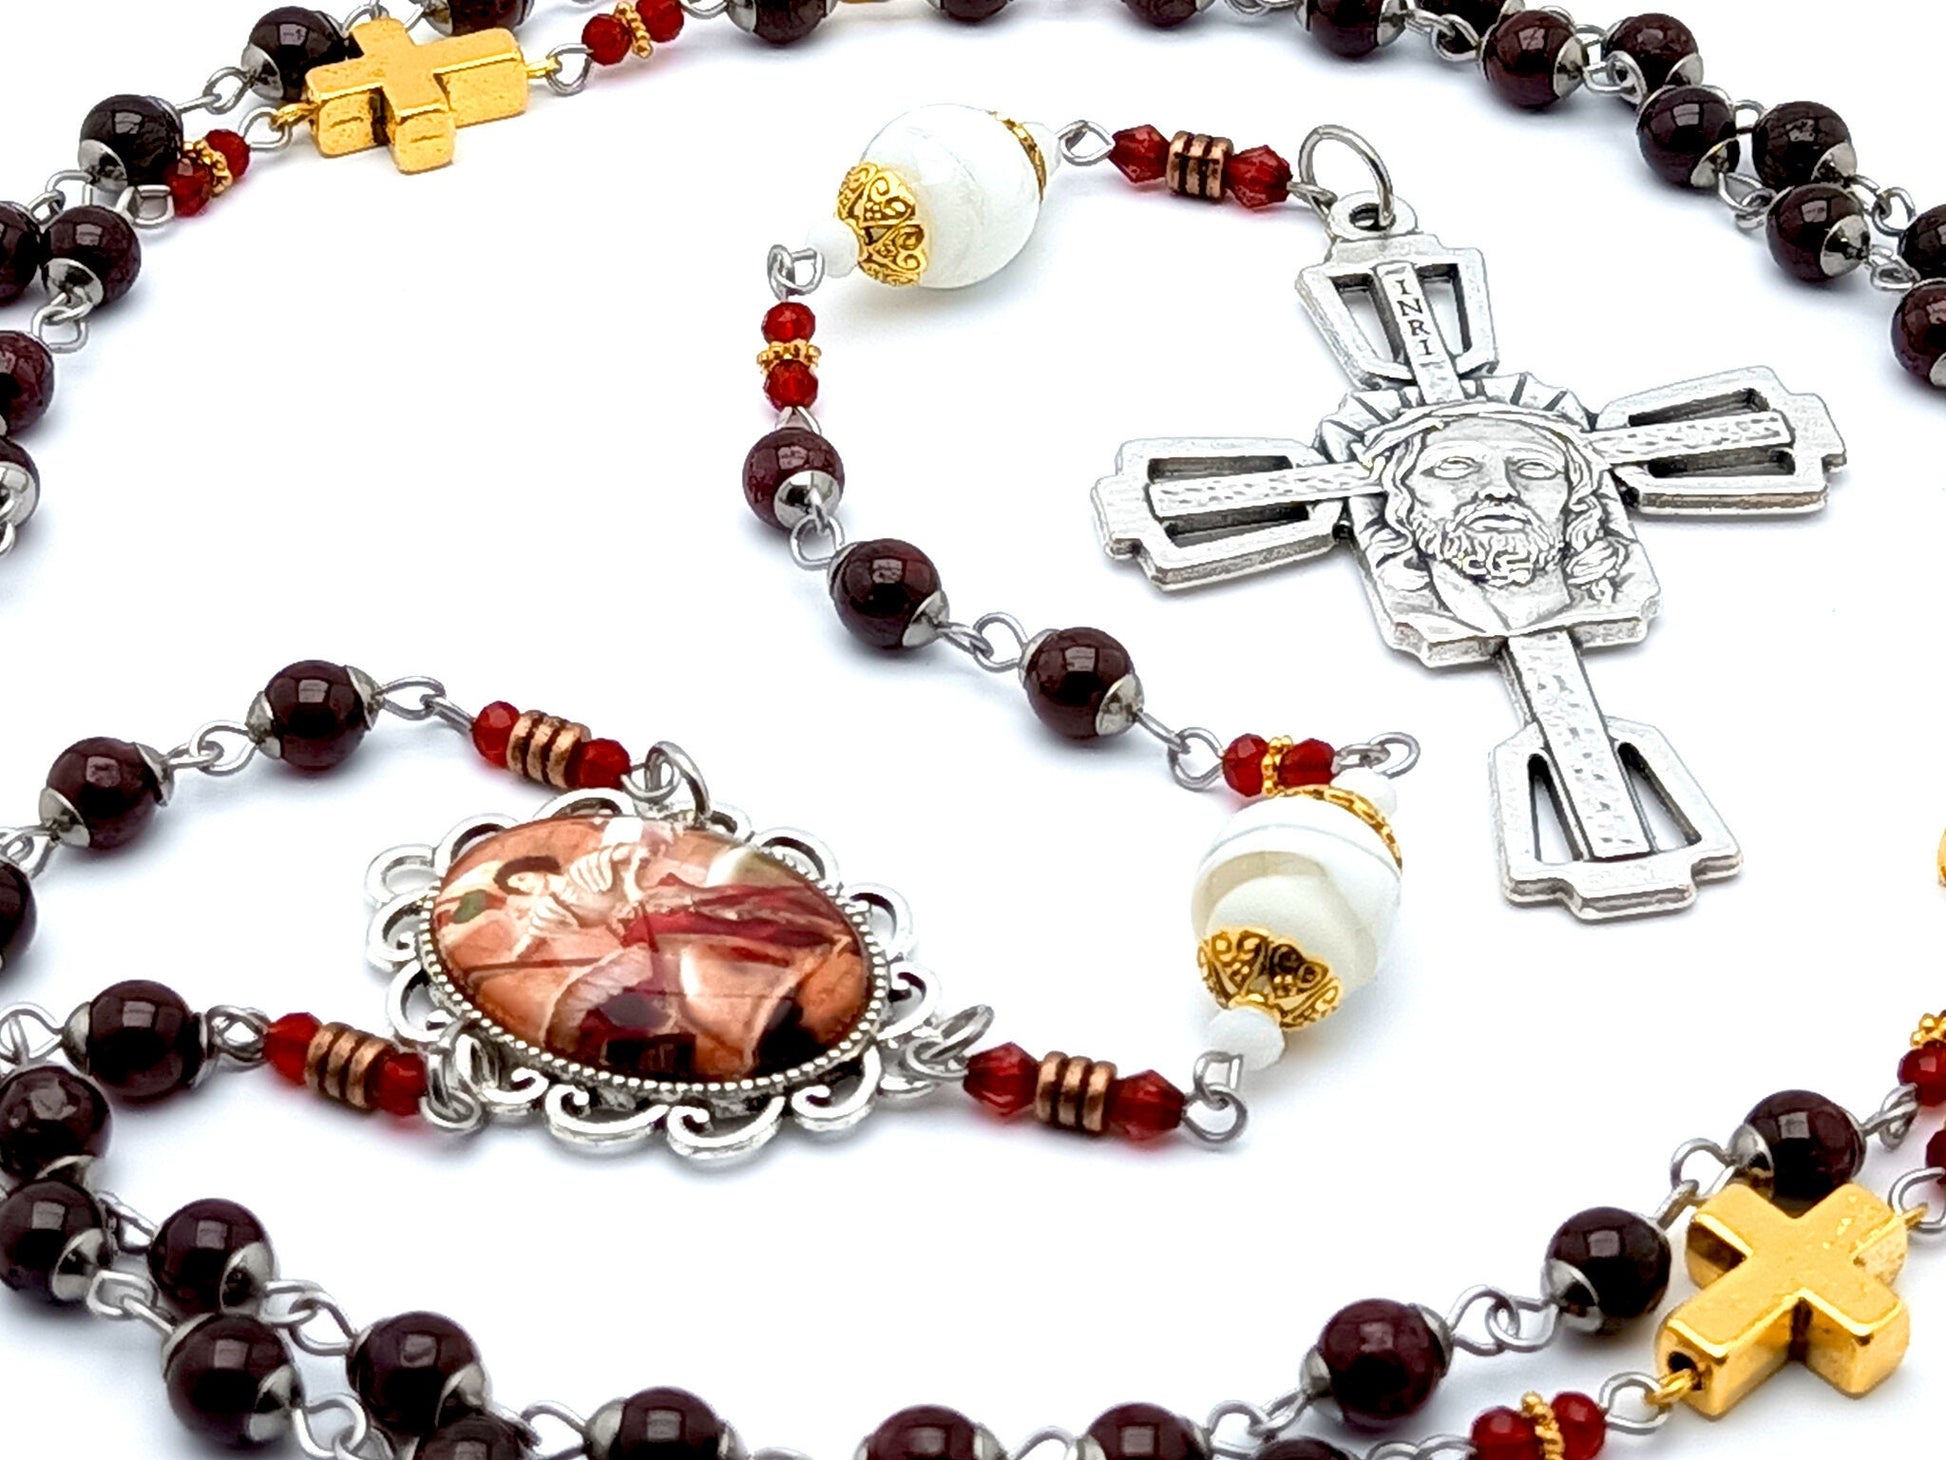 Saint Joan of Arc garnet gemstone rosary beads with Crowning of Thorns –  Unique Rosary Beads